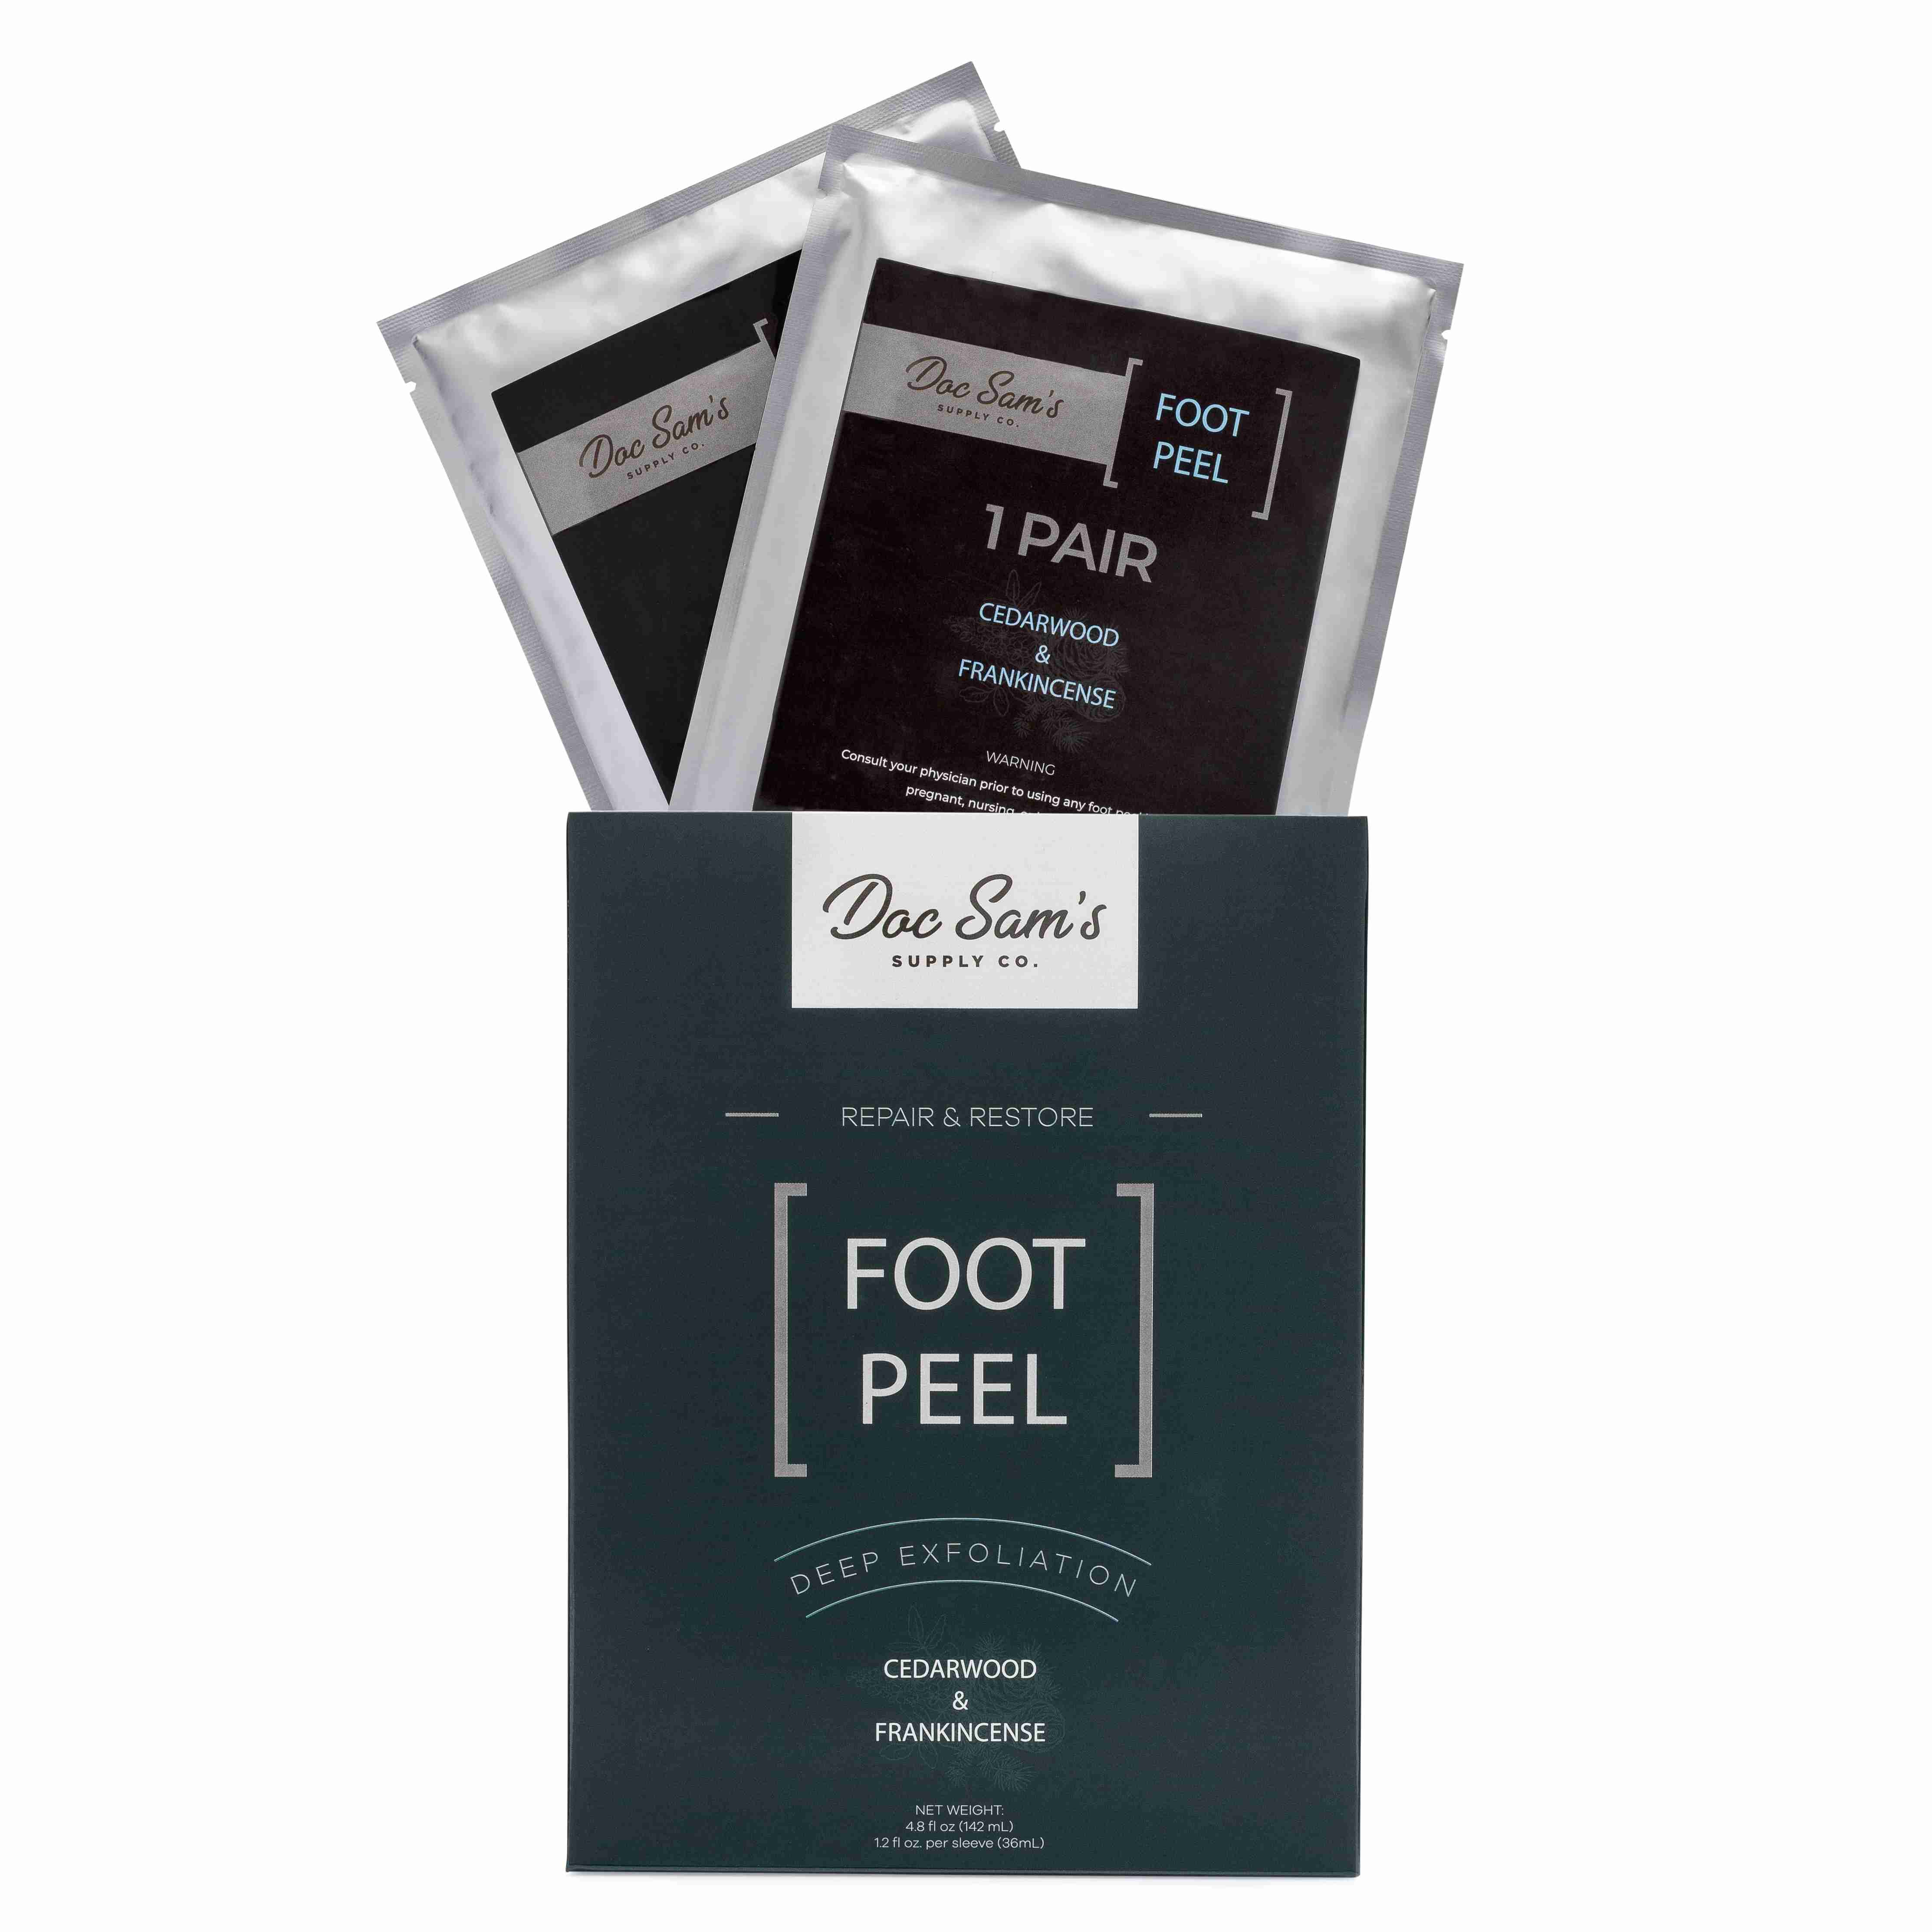 Exfoliating-Foot-Peel for cheap